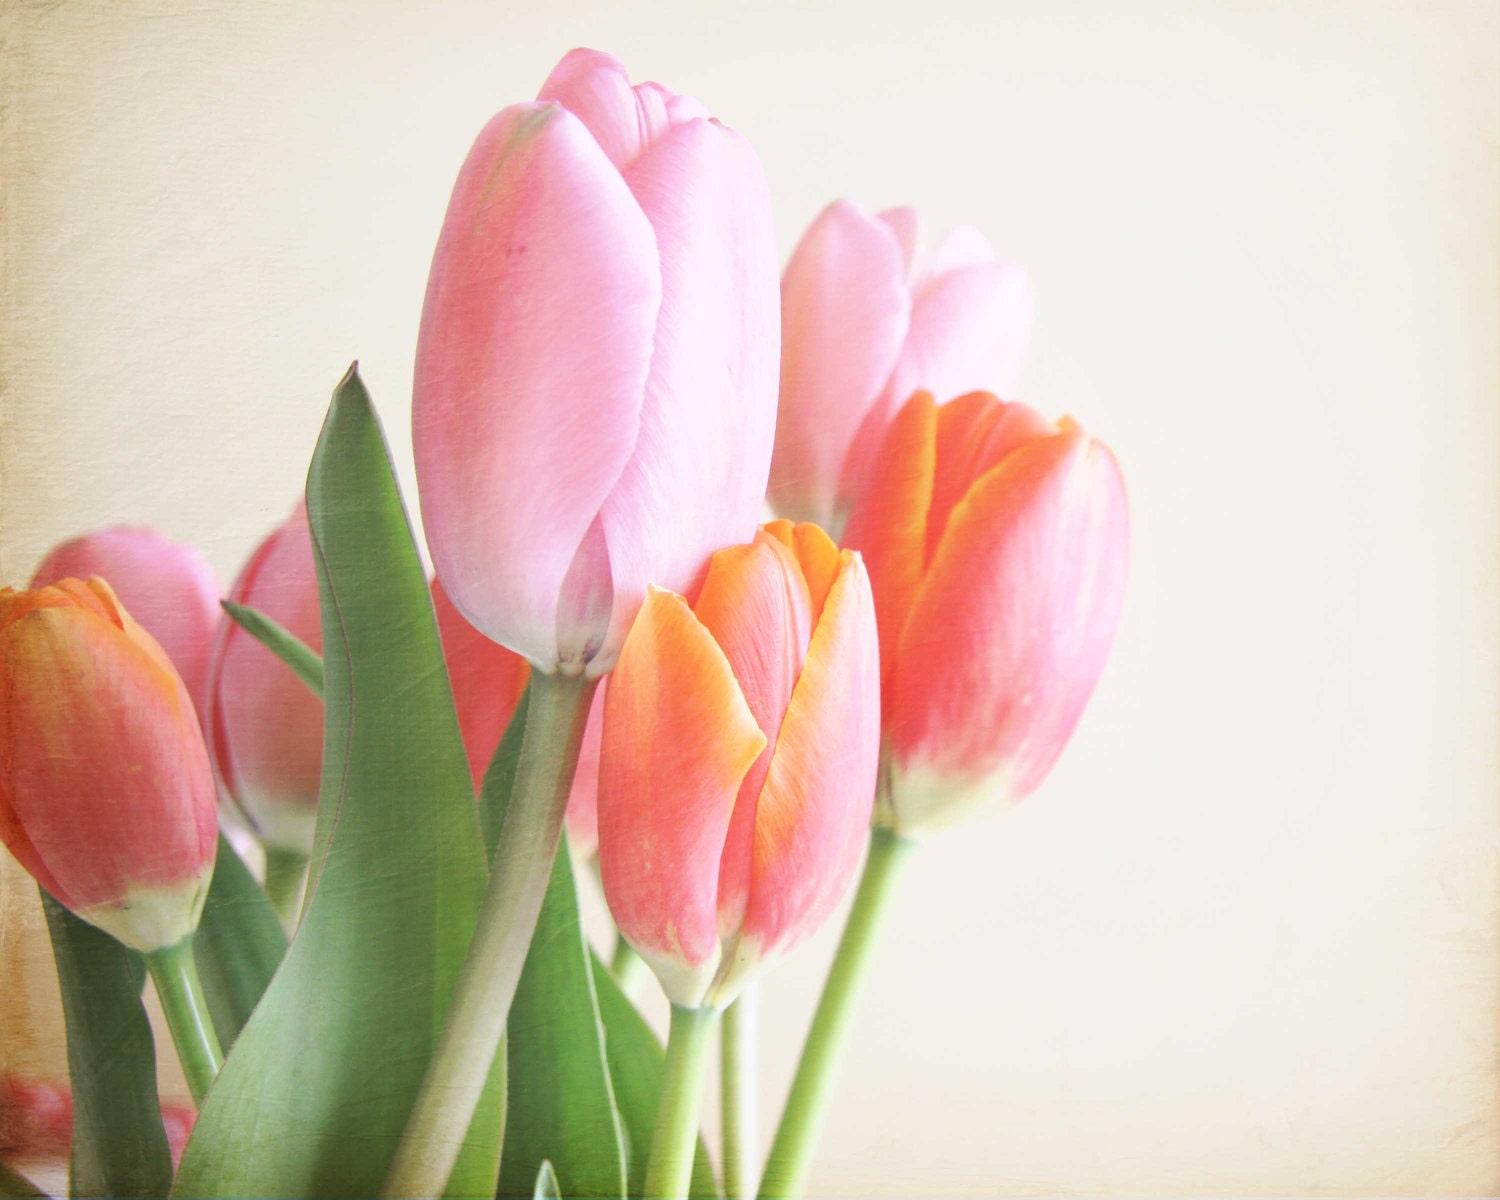 mothers day, spring, spring tulips, easter colours, pastel colors, peach, pink, flowers, blossoms, peach, green, 8x10 photo - trekkerjen